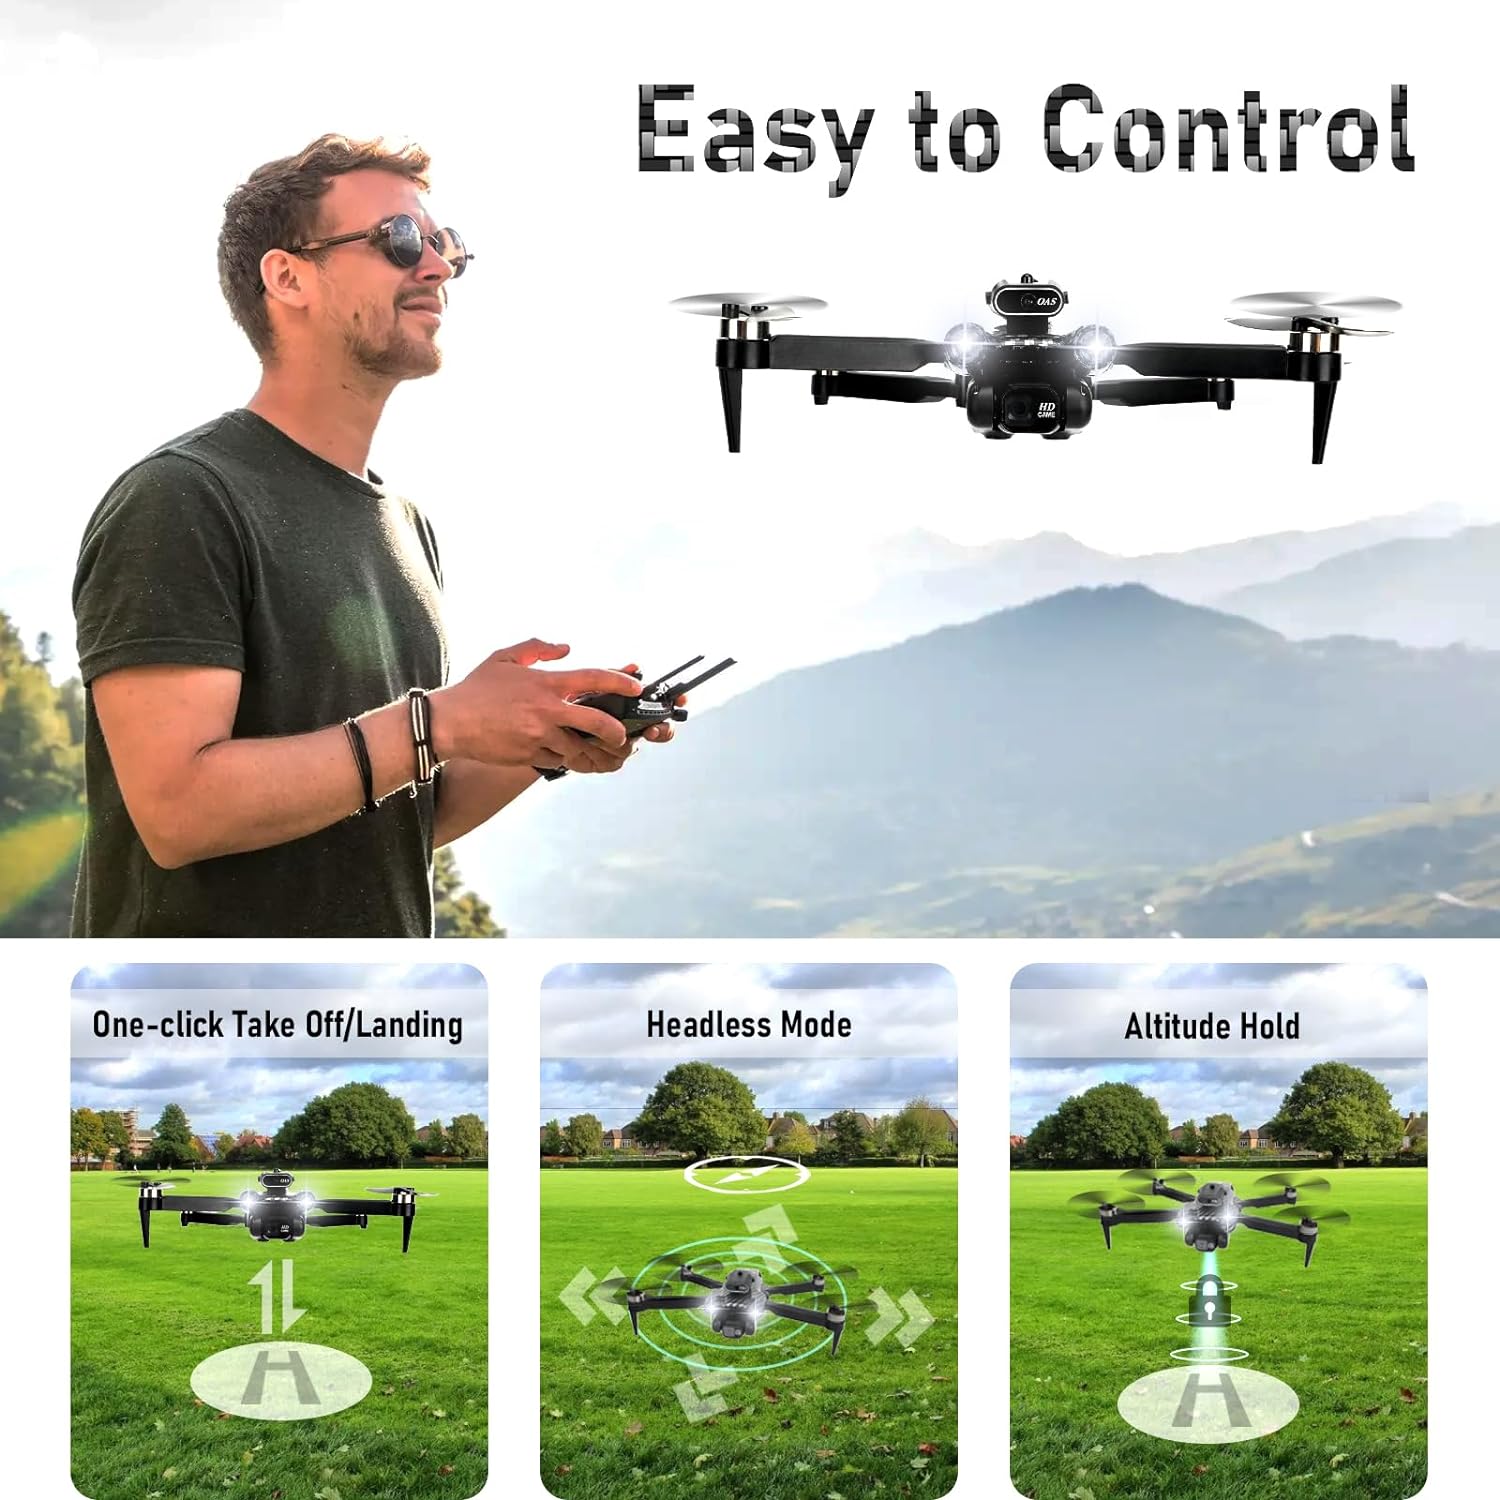 FLYVISTA Mini Drone with Camera for Adults Kids, 1080P WiFi FPV Camera Drone with 3 Batteries, One-Click Take Off/Landing, Altitude Hold, Headless Mode, 360° Flips, 3-Gear Speeds, Emergency Stop, Carrying Case, Toys Gifts for Kids and Adults Beginner